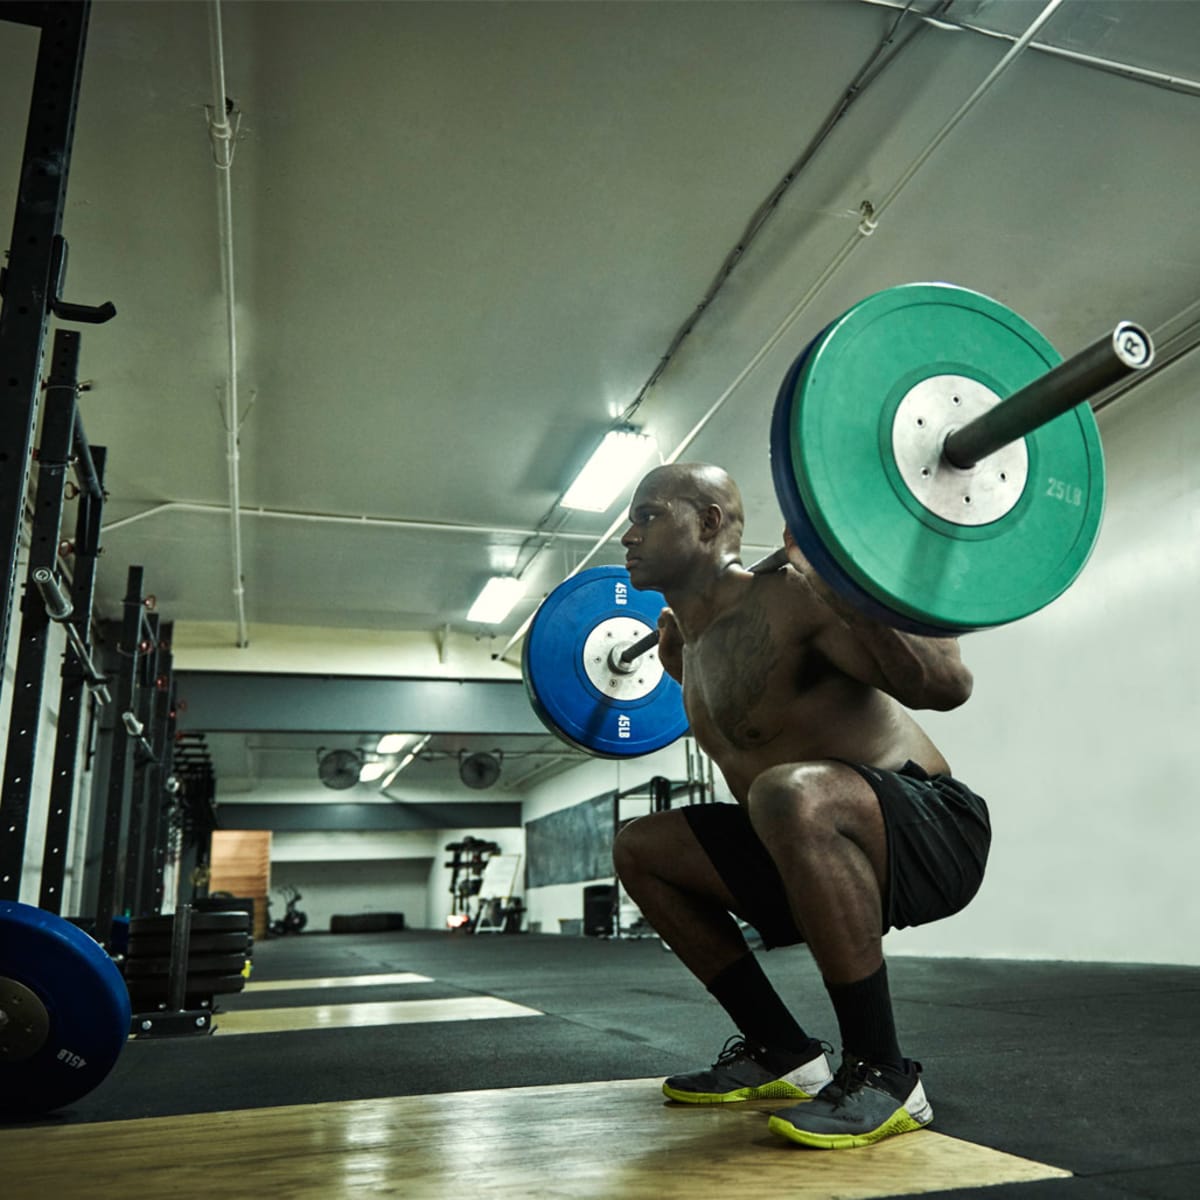 How to Squat to Build Muscle and Strength: Trainer Tips